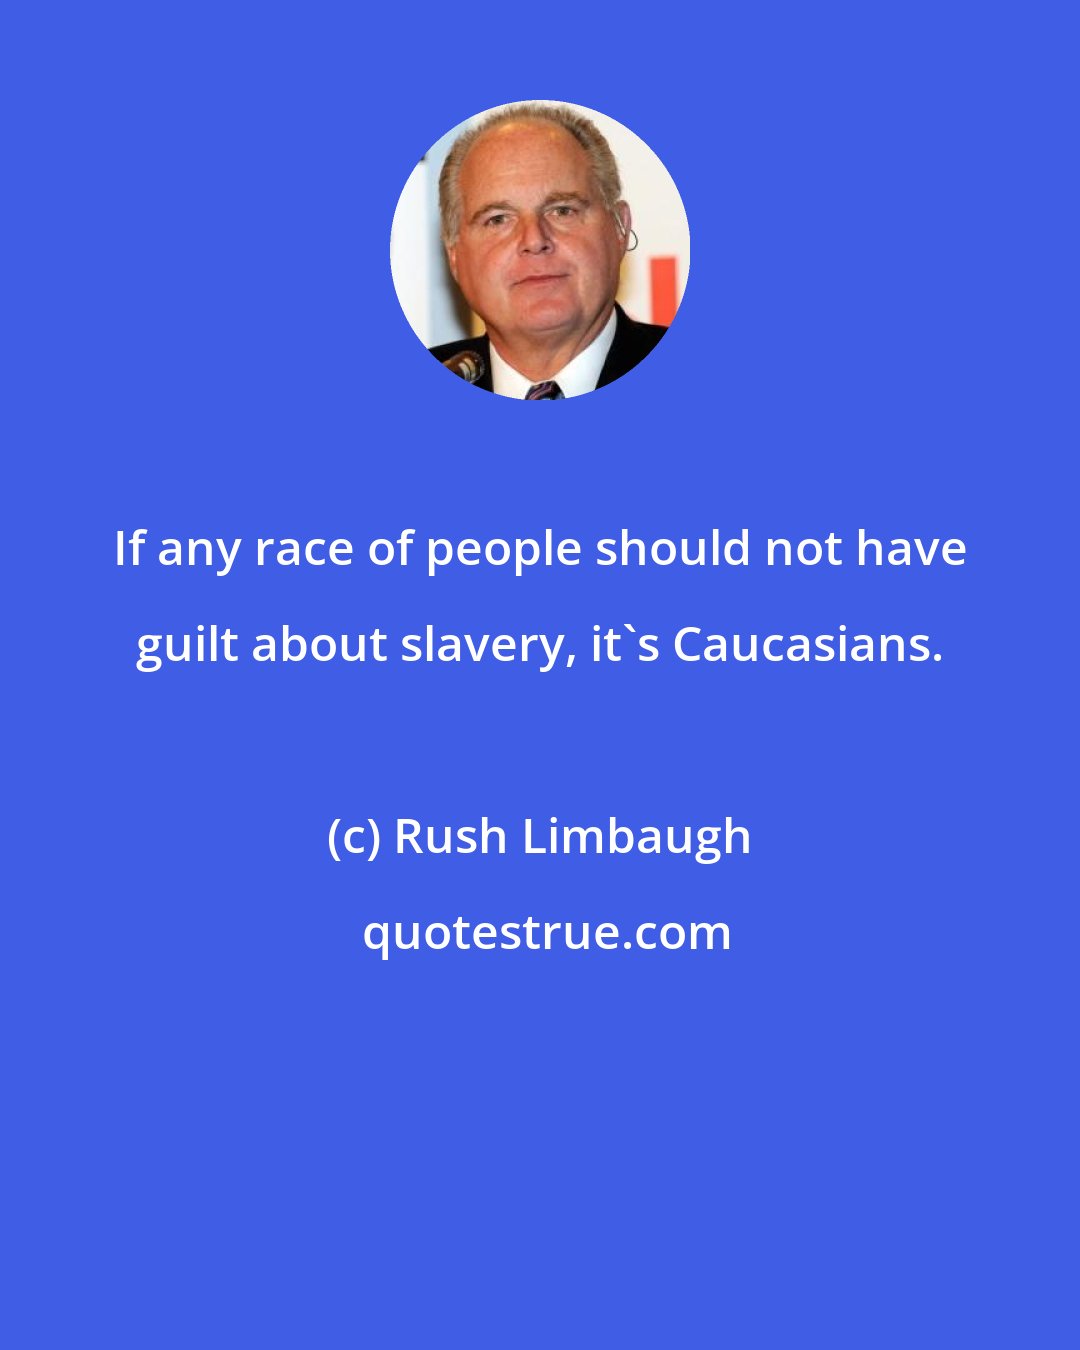 Rush Limbaugh: If any race of people should not have guilt about slavery, it's Caucasians.